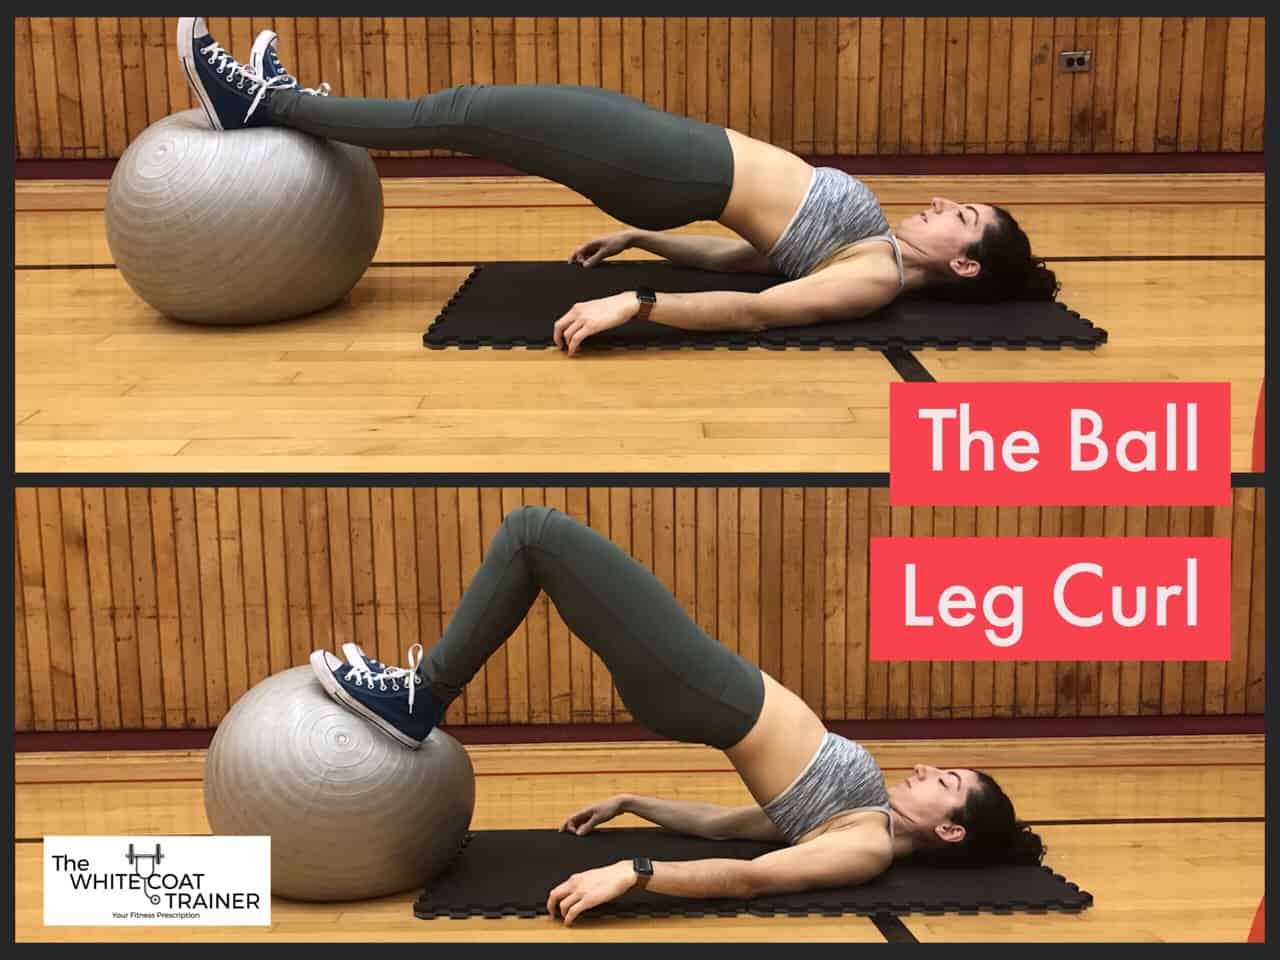 ball-leg-curl: Brittany on her back with knees bent and feet on top of a bosu ball  Squeezing her butt muscles to extend at the hips as she flexes her knees back to bring the ball closer to her